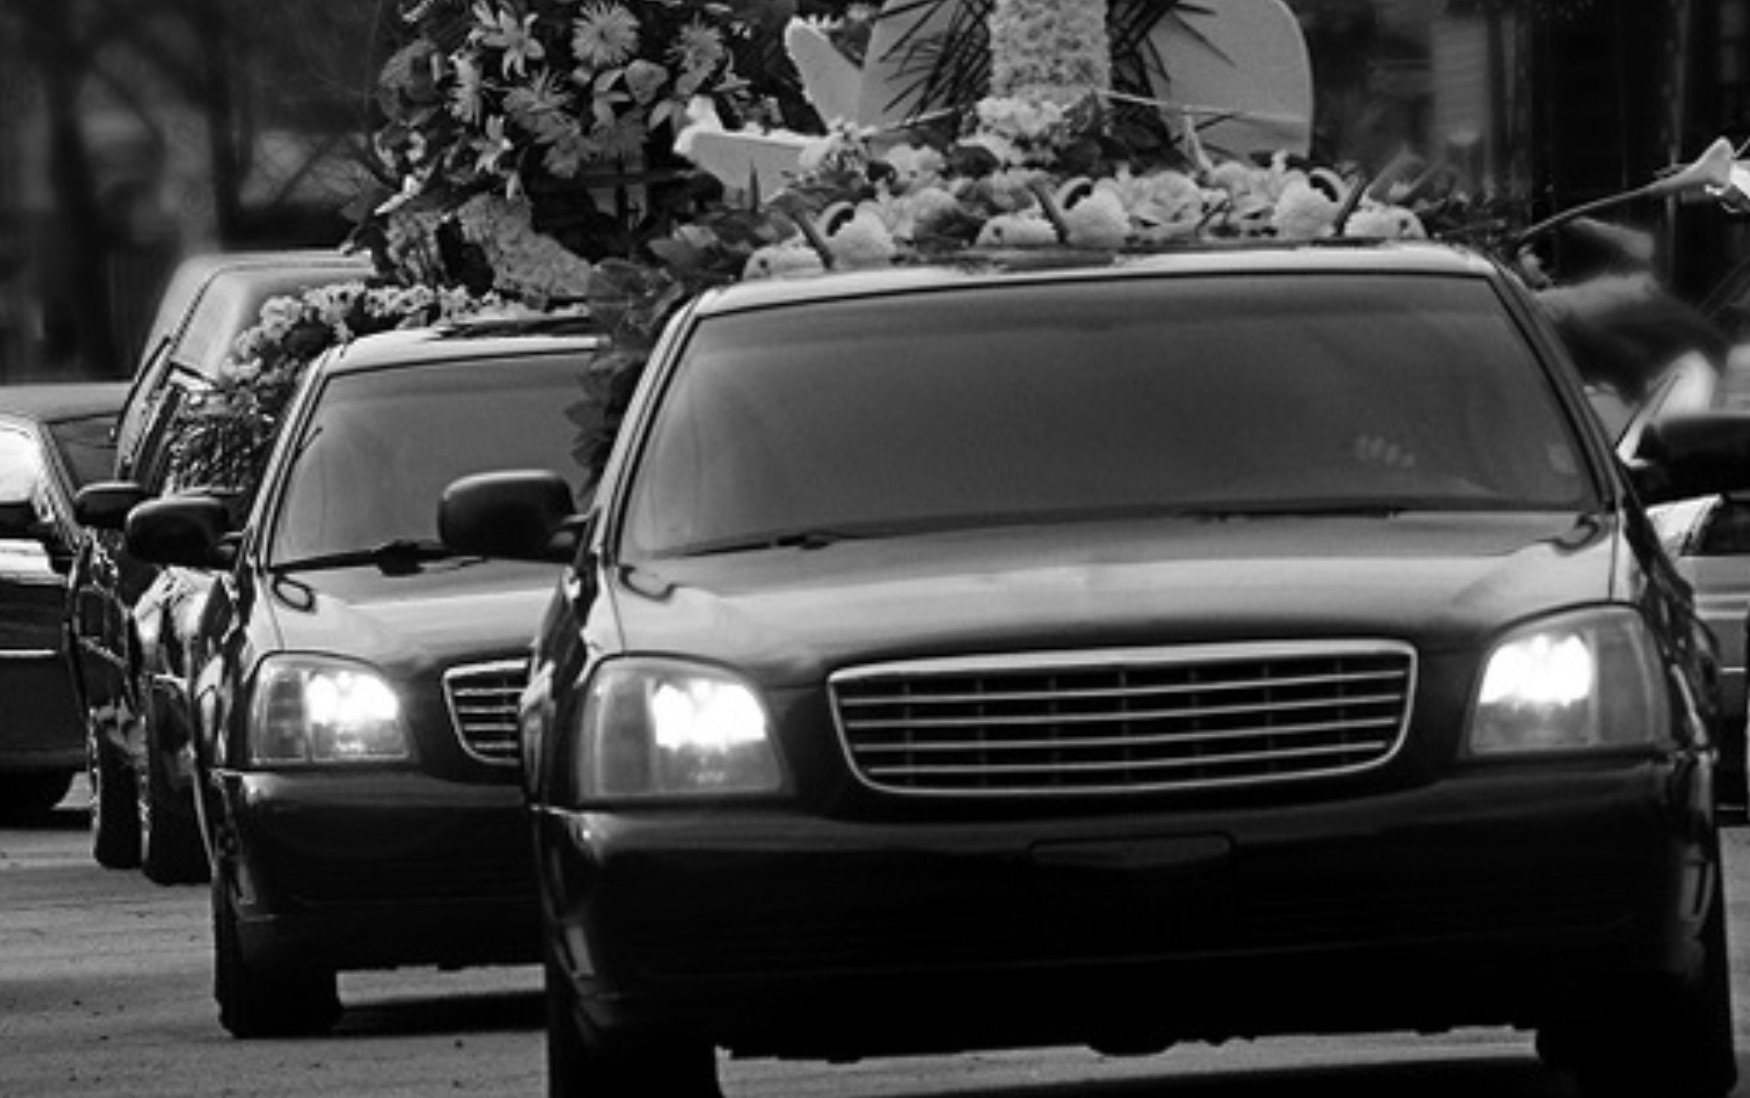 FUNERAL TRANSPORT: What Are Your Options?